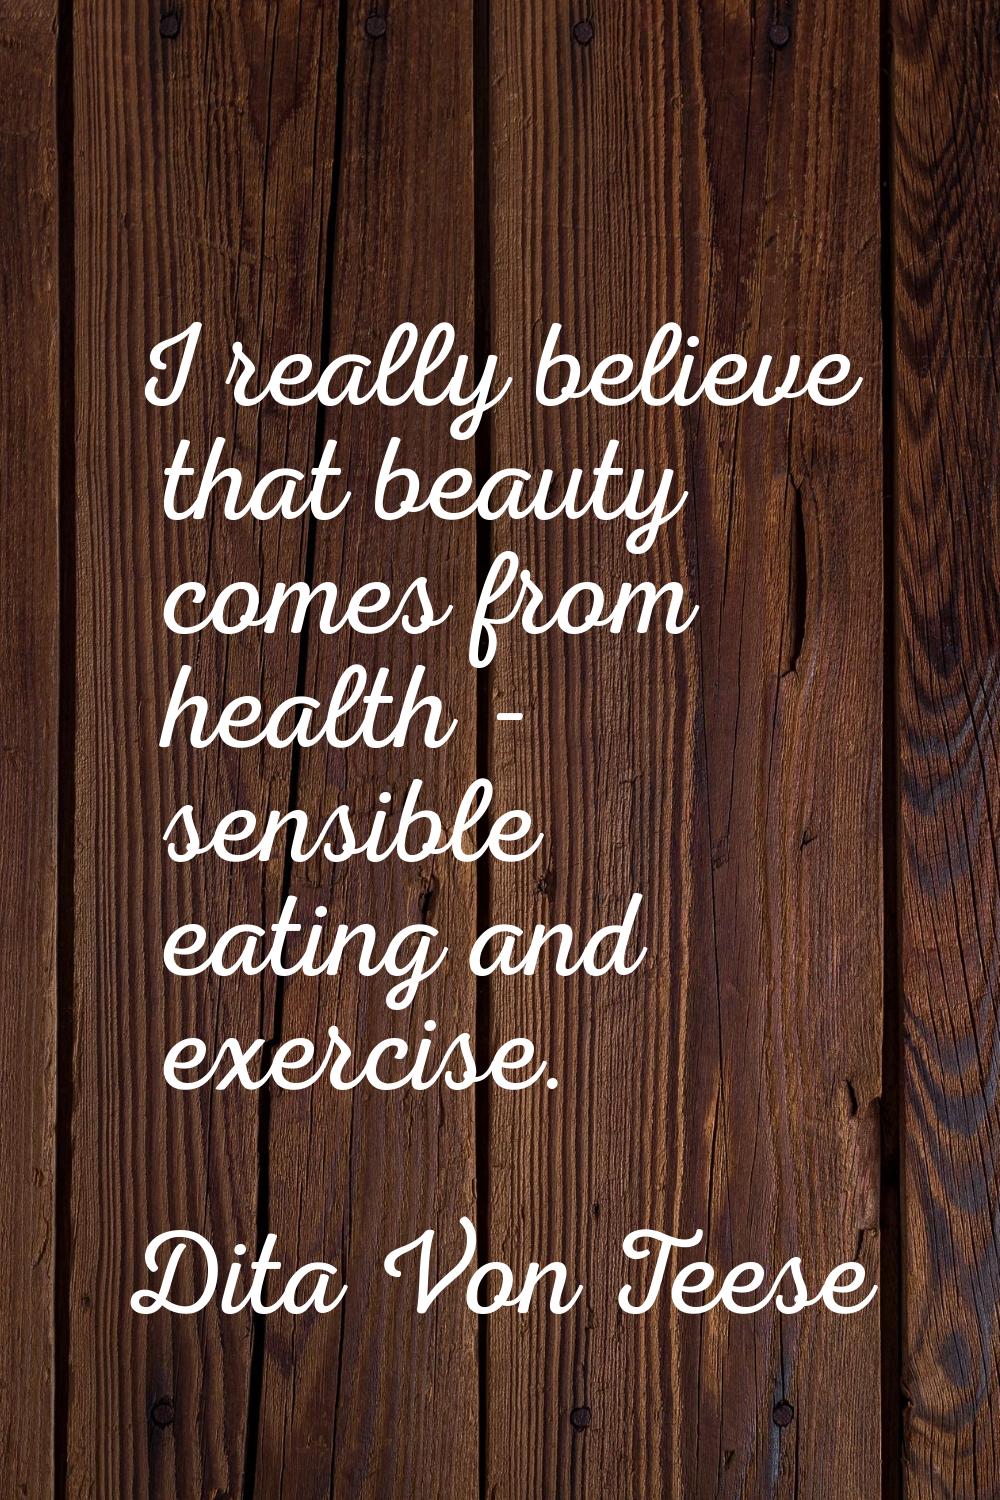 I really believe that beauty comes from health - sensible eating and exercise.